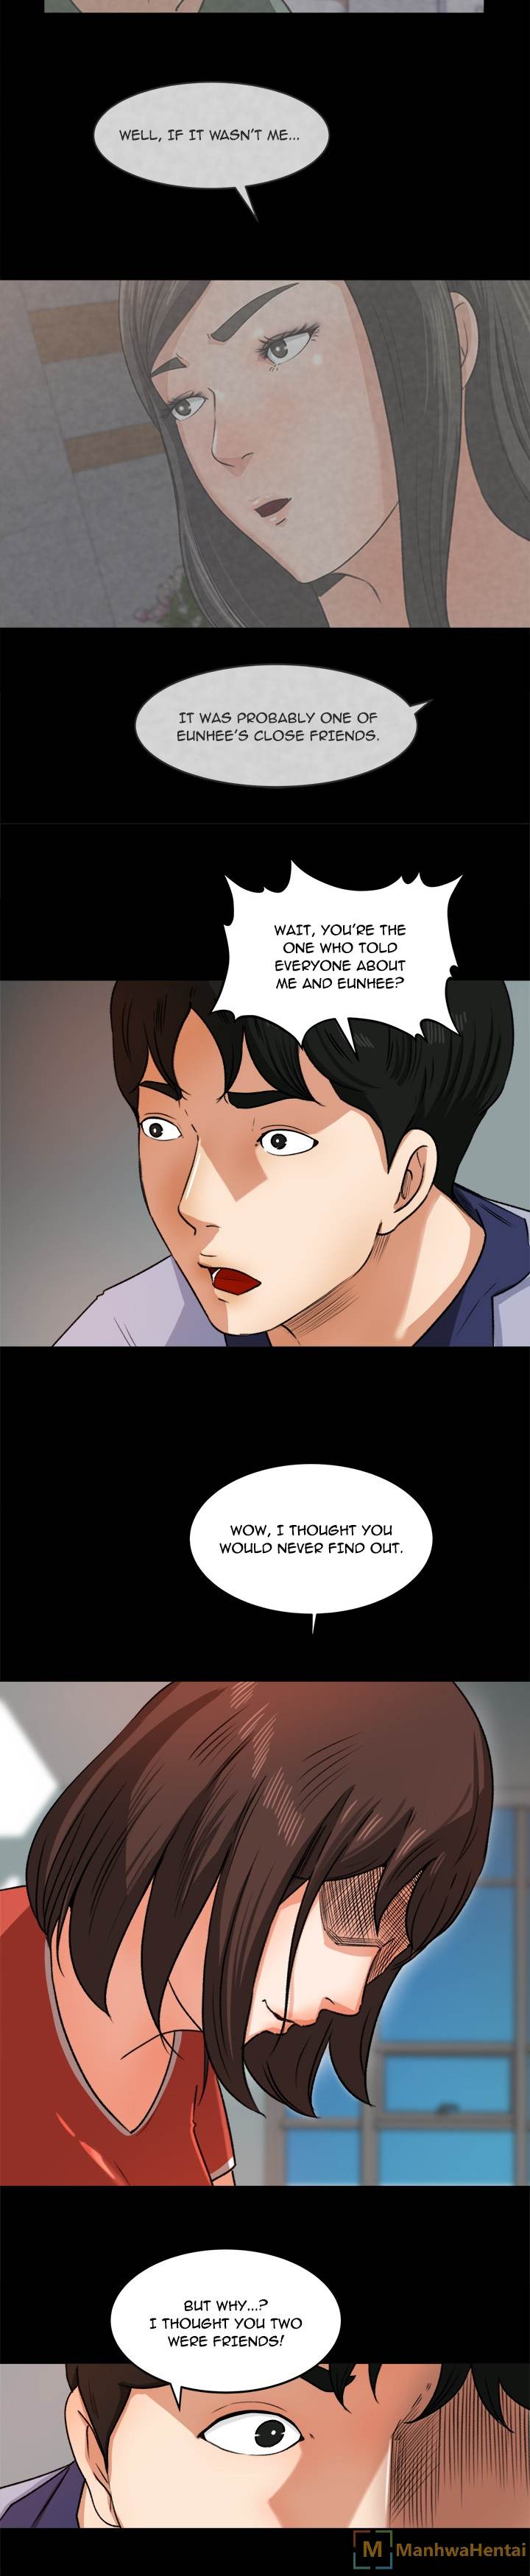 Inside the Uniform - Chapter 26 Page 8